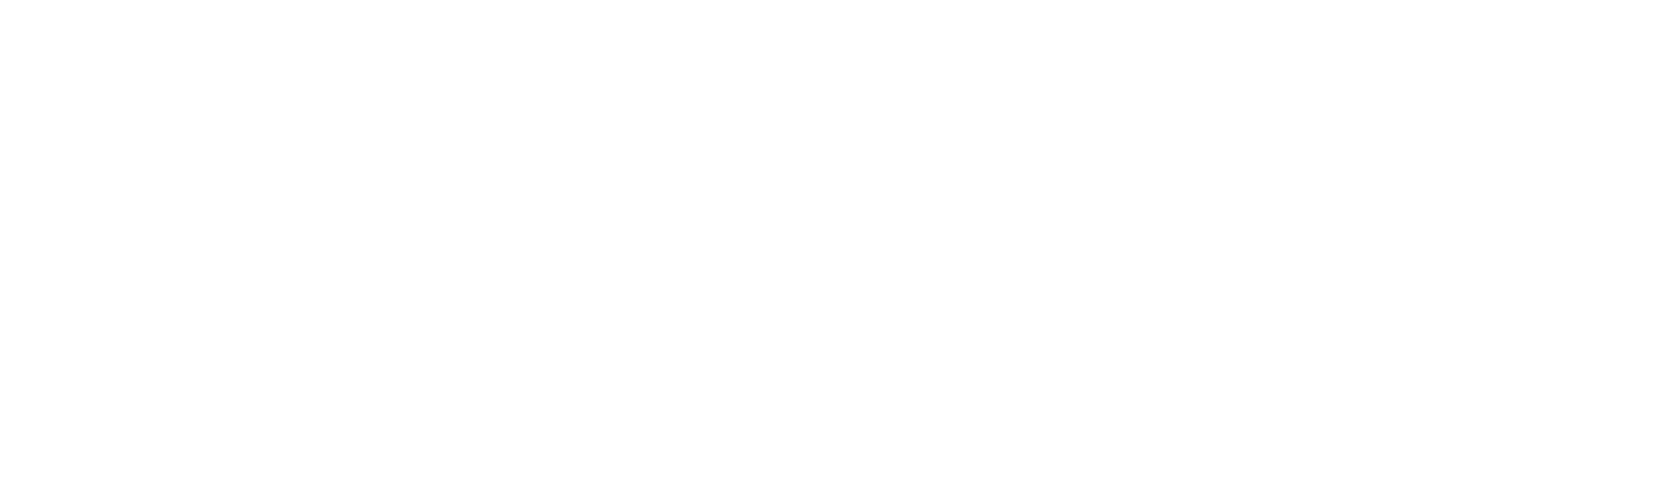 Alfred Emergency Academic Centre